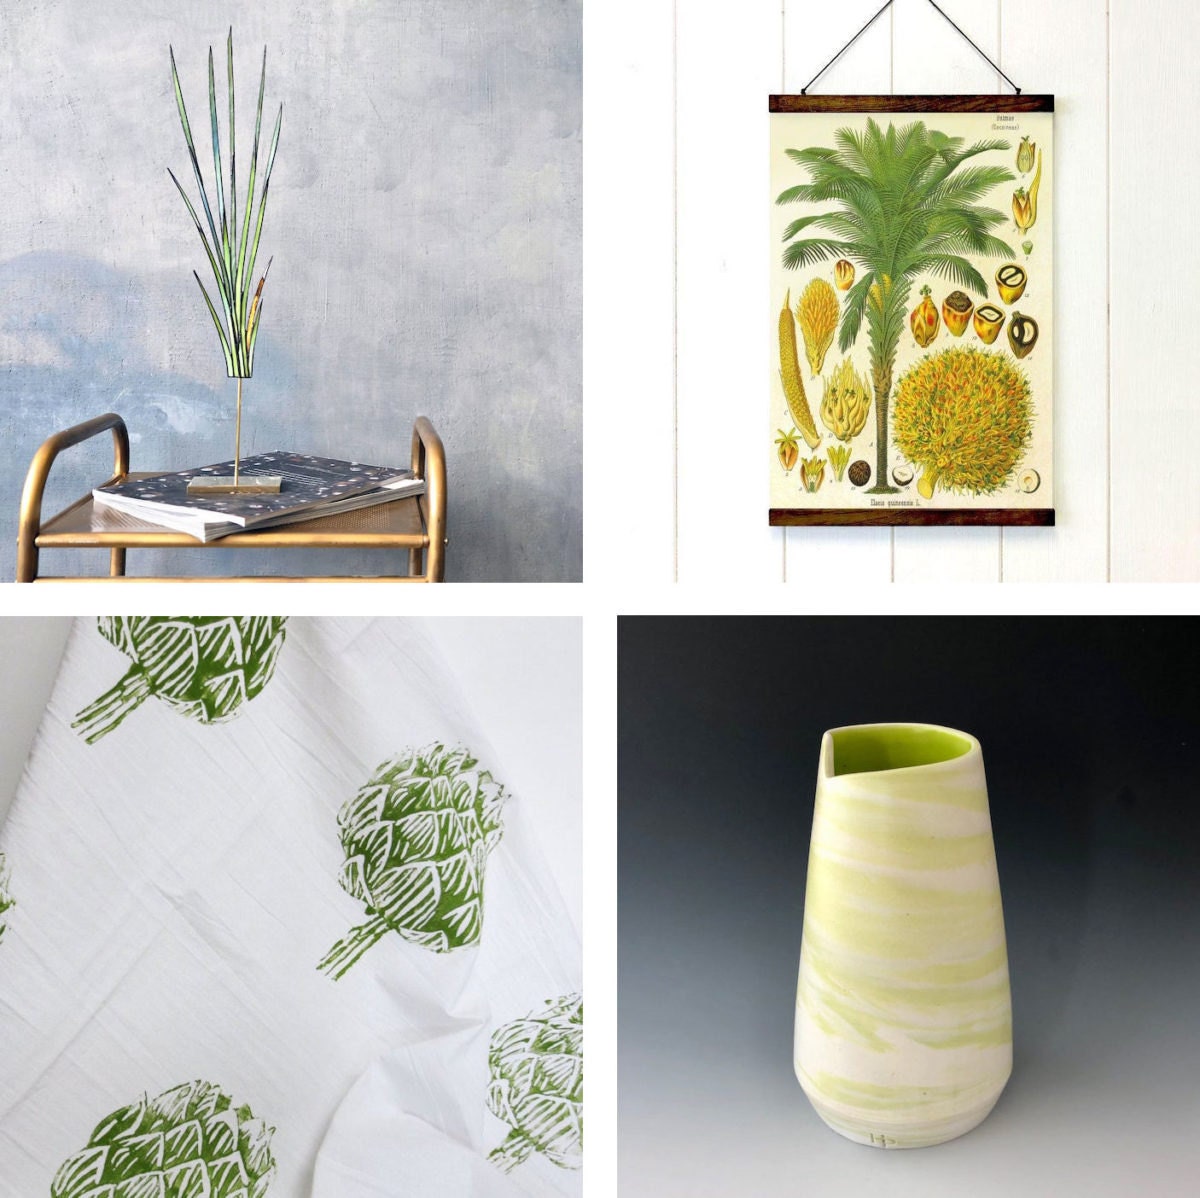 Collage of four peridot-colored home decor items: a stained-glass suncatcher, a botanical print, a ceramic vase, and a printed tea towel